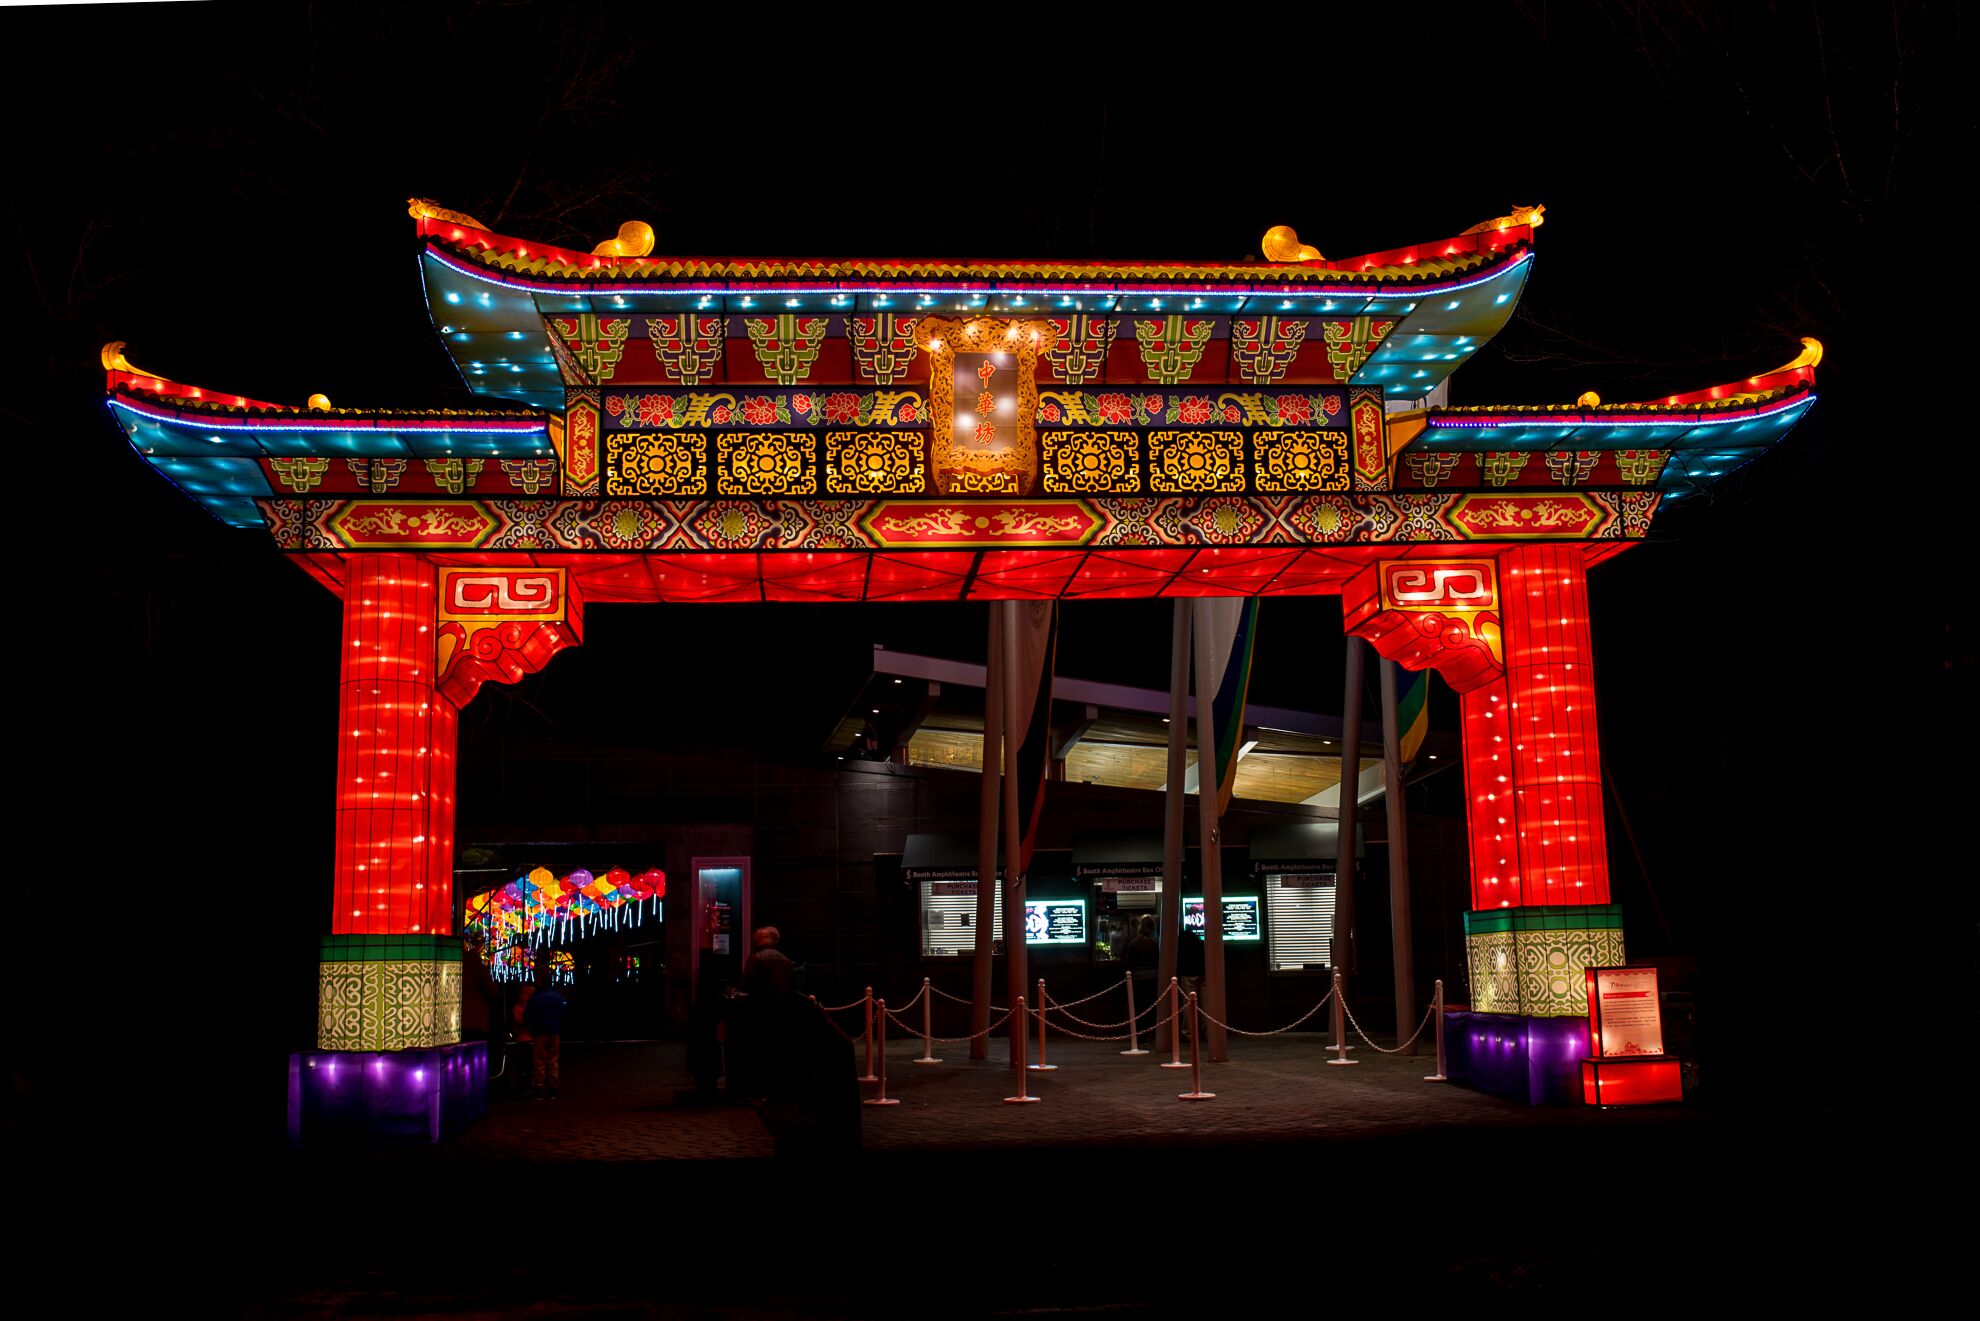 Now in its fourth year, the N.C. Chinese Lantern Festival attracted 90,000 visitors to Cary, N.C. during the 2017-2018 festival.